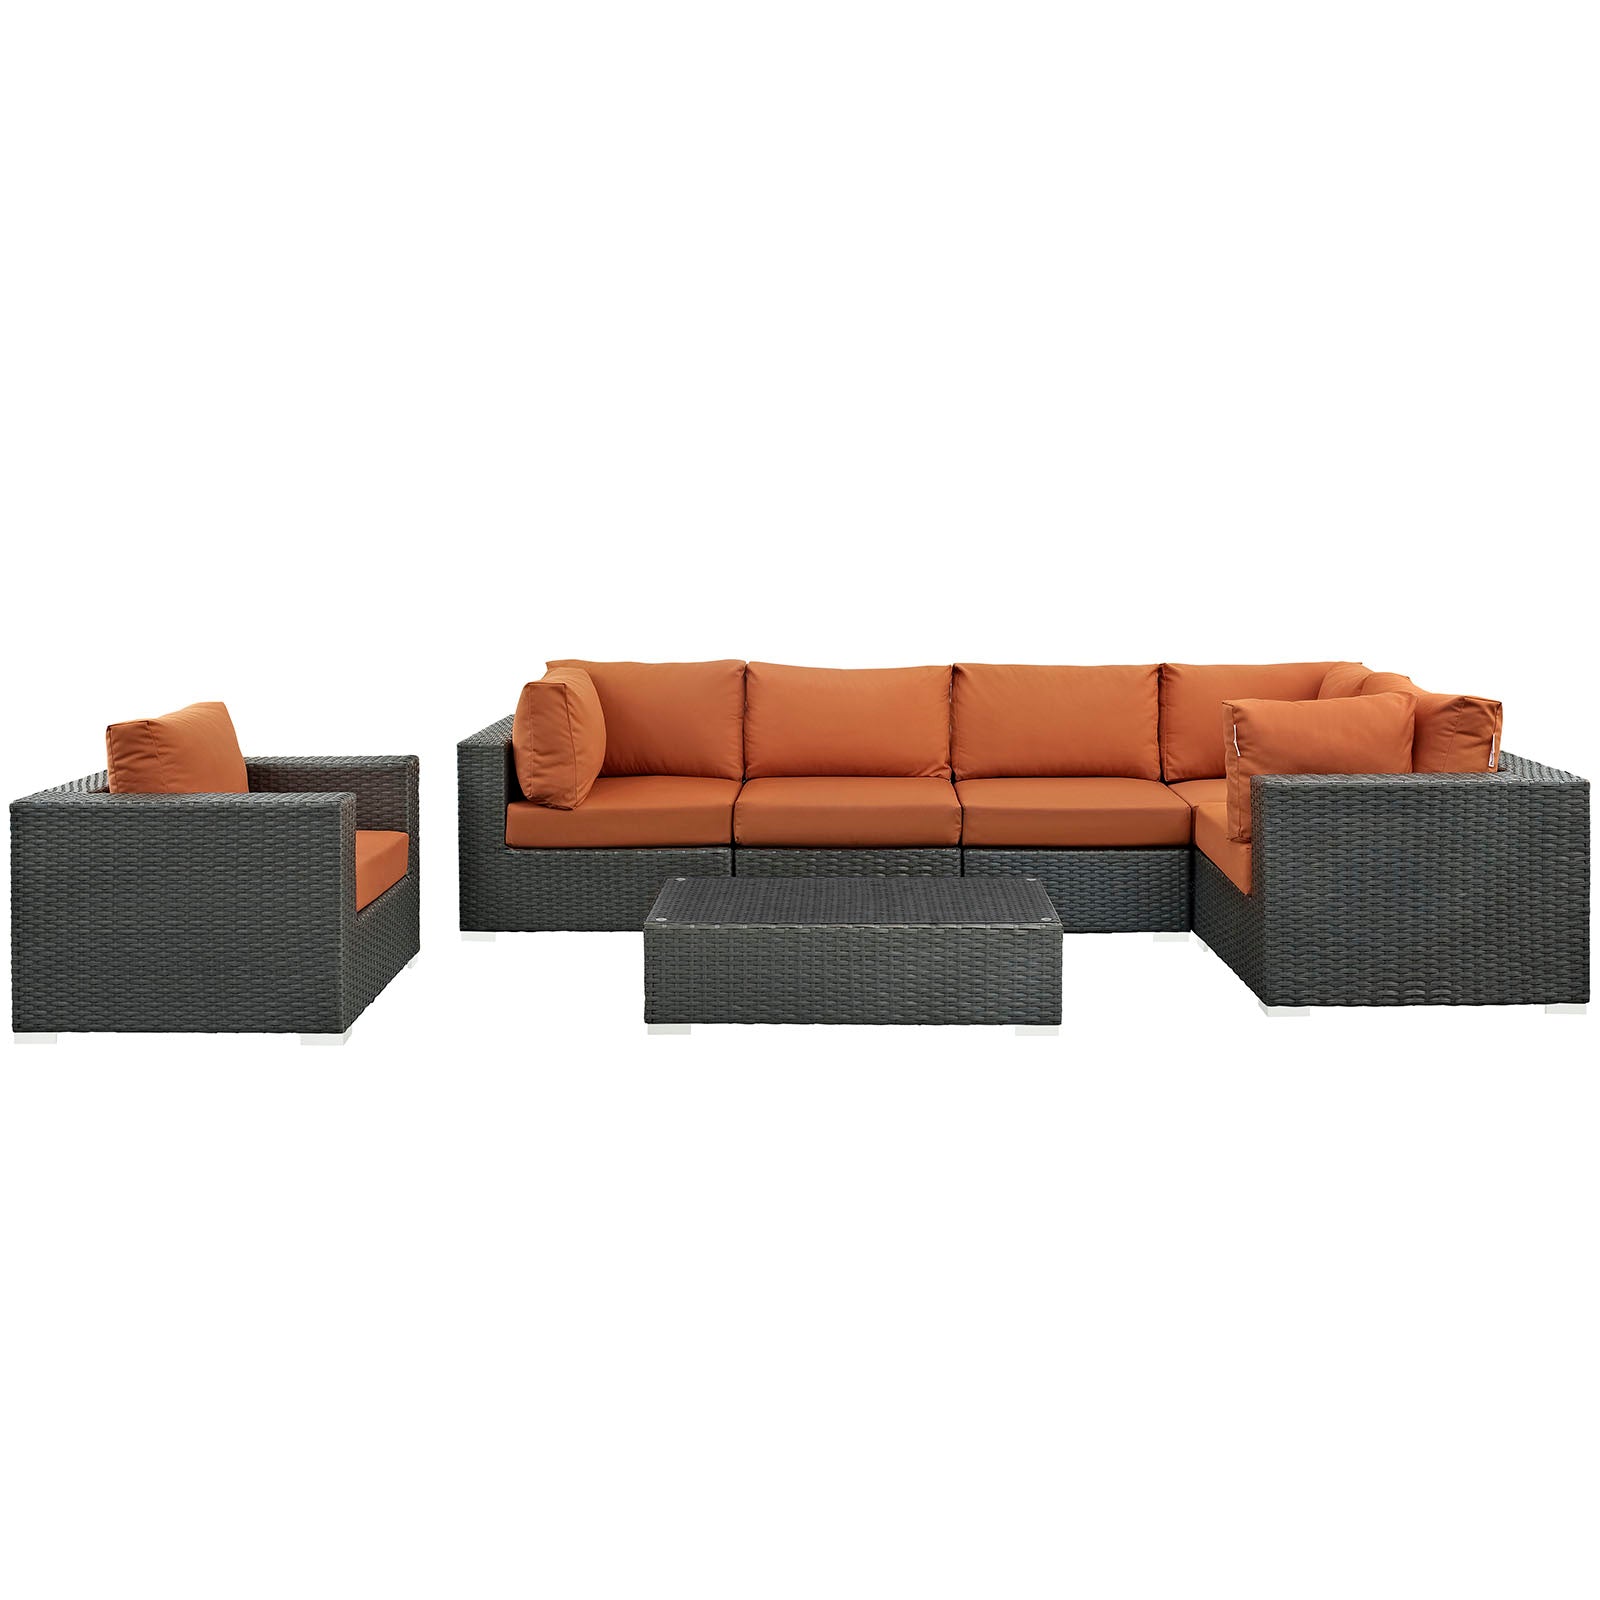 Modway Outdoor Conversation Sets - Sojourn 7 Piece Outdoor Patio 25"H Sectional Set Canvas Tuscan